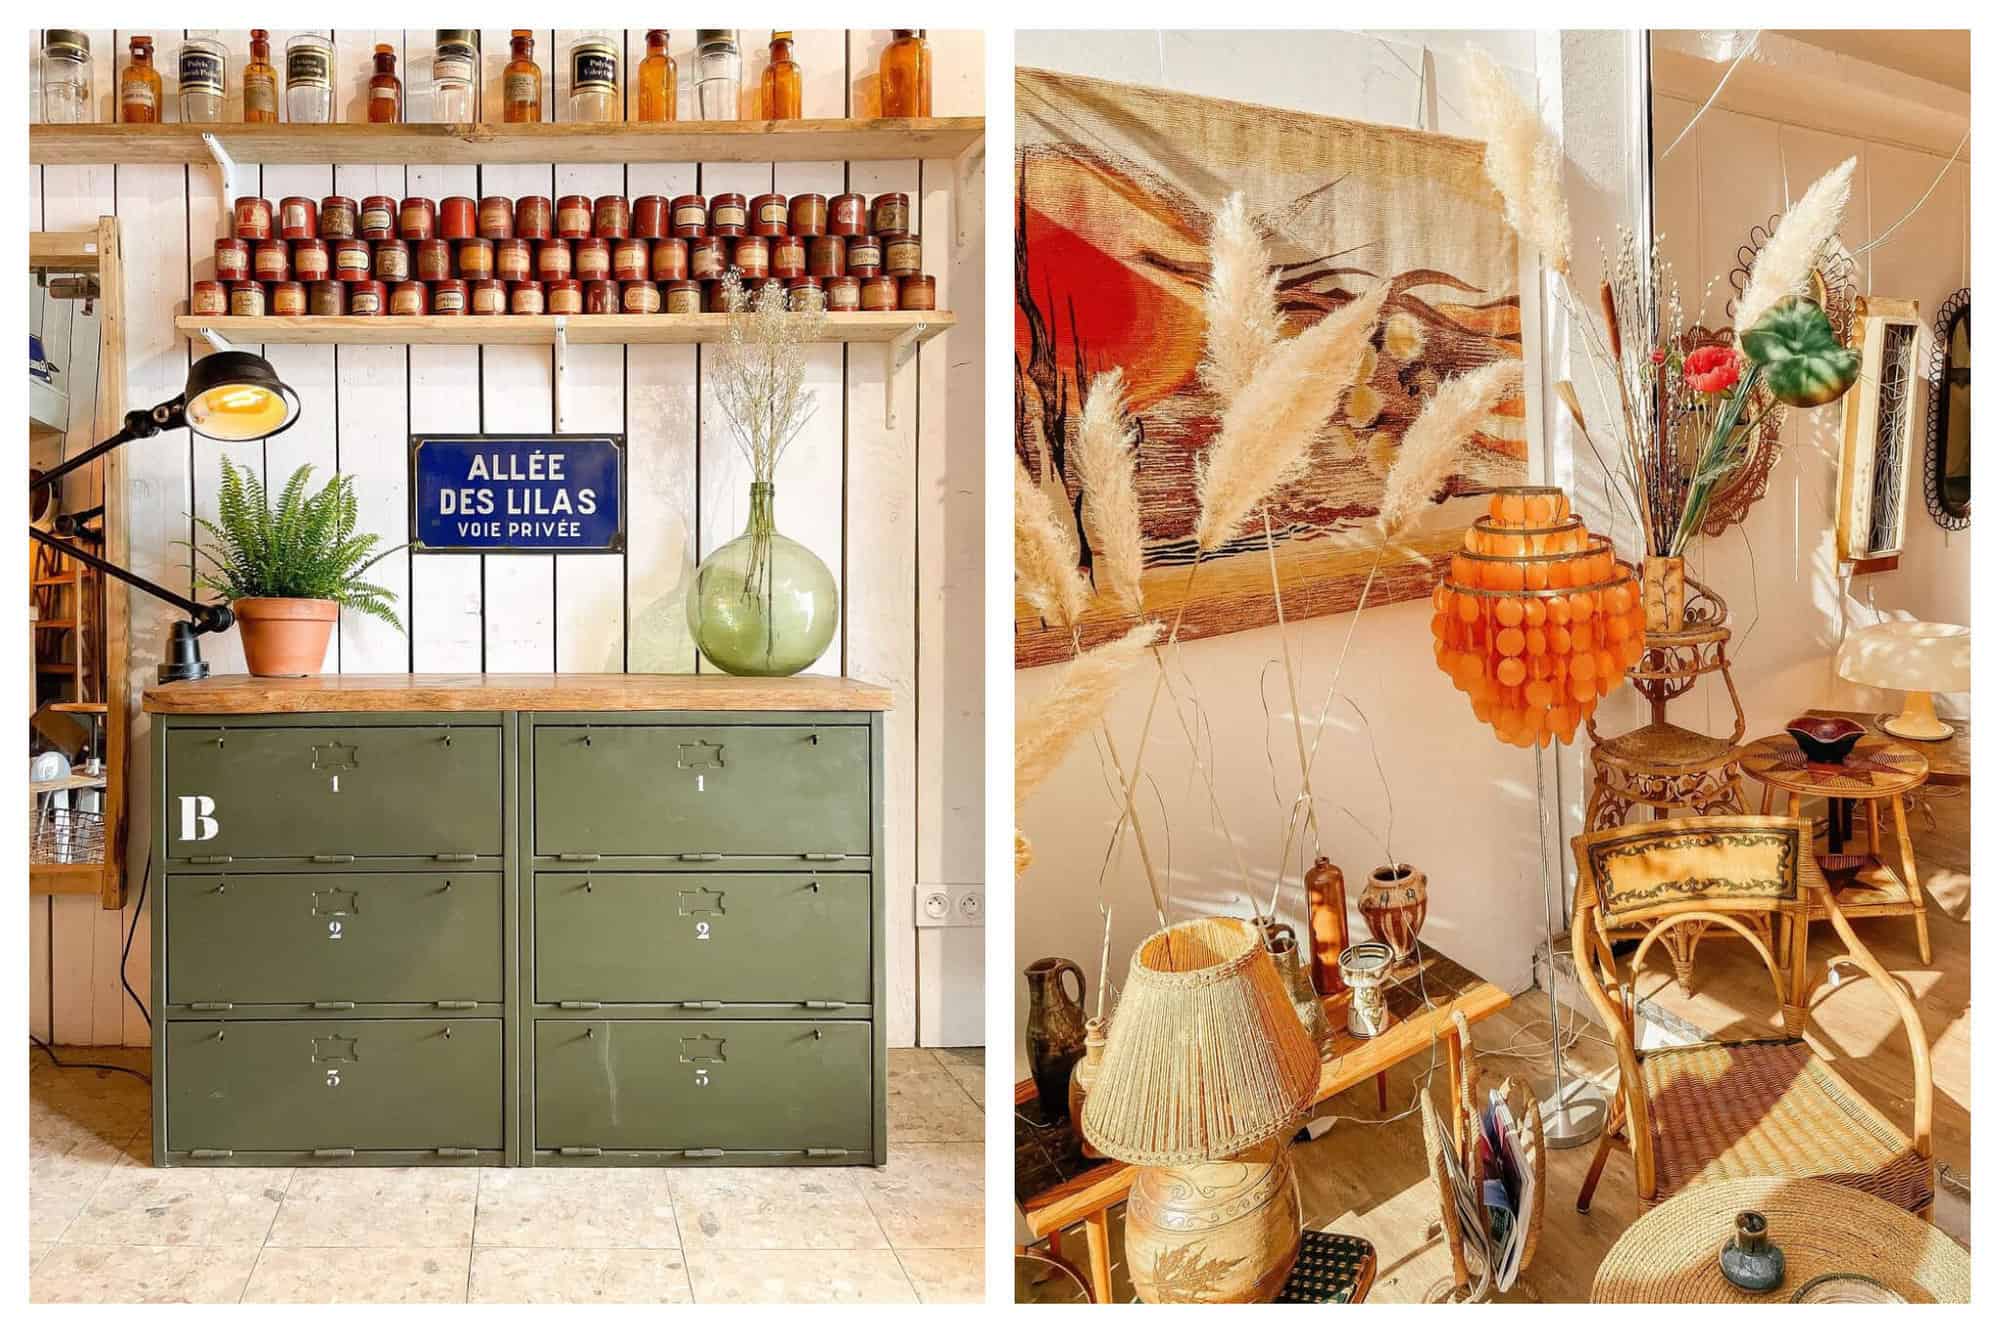 Left: A photo of a set of green dresser draws with a plant and a vase resting on top, at a shop in Les Puces. Above the draws on the wall is a Paris street sign and a collection of candles and bottles resting on shelves. Right: A photo of many antiques in a white room, including chairs, lamps, prints, vases, rugs and flowers.